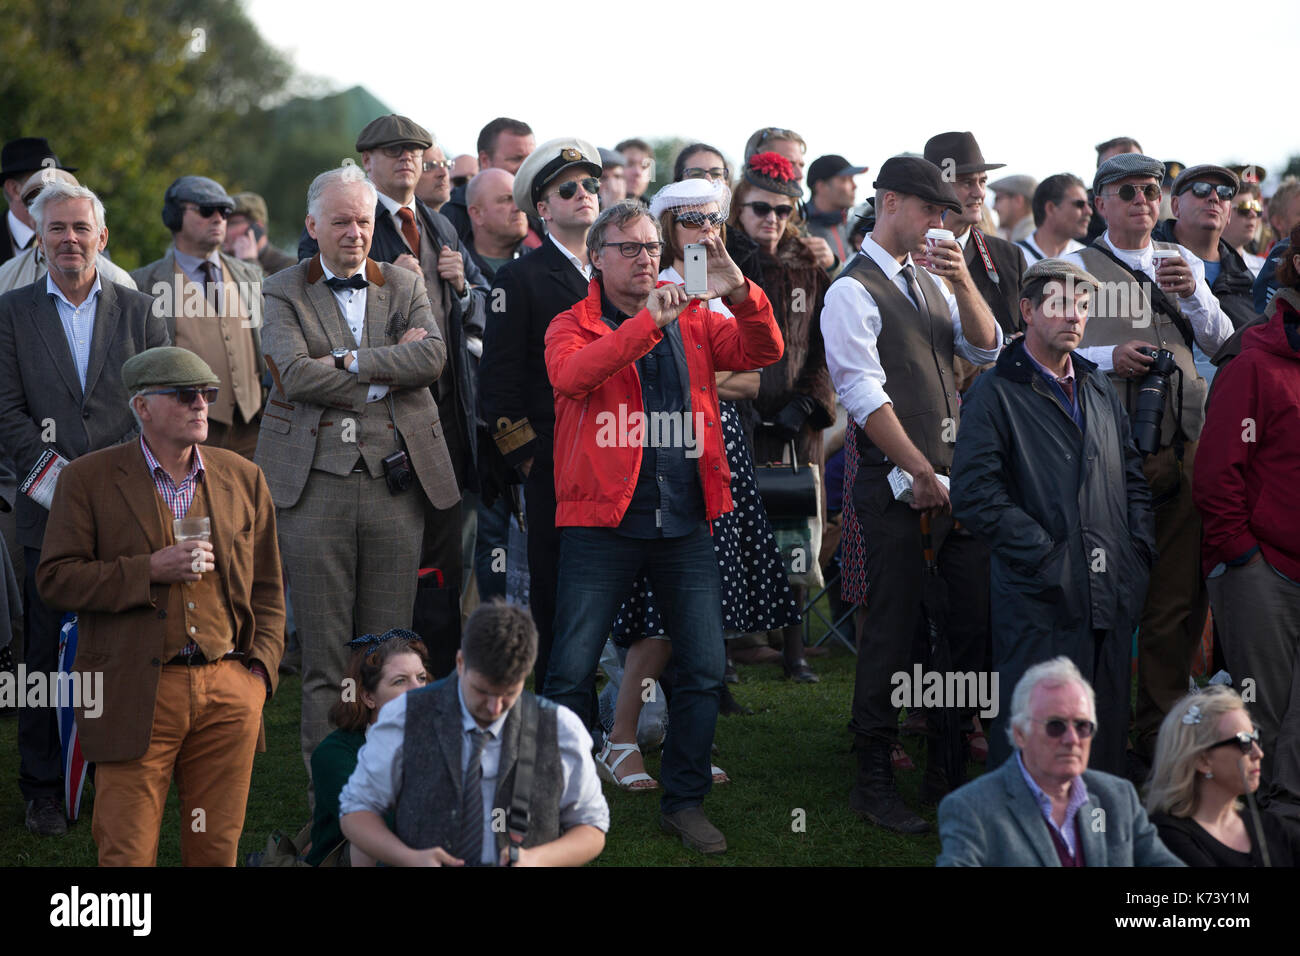 Goodwood Revival 2017 Meeting, Goodwood race track, organised by the British Automobile Racing Club, Chichester, West Sussex, England, UK Stock Photo